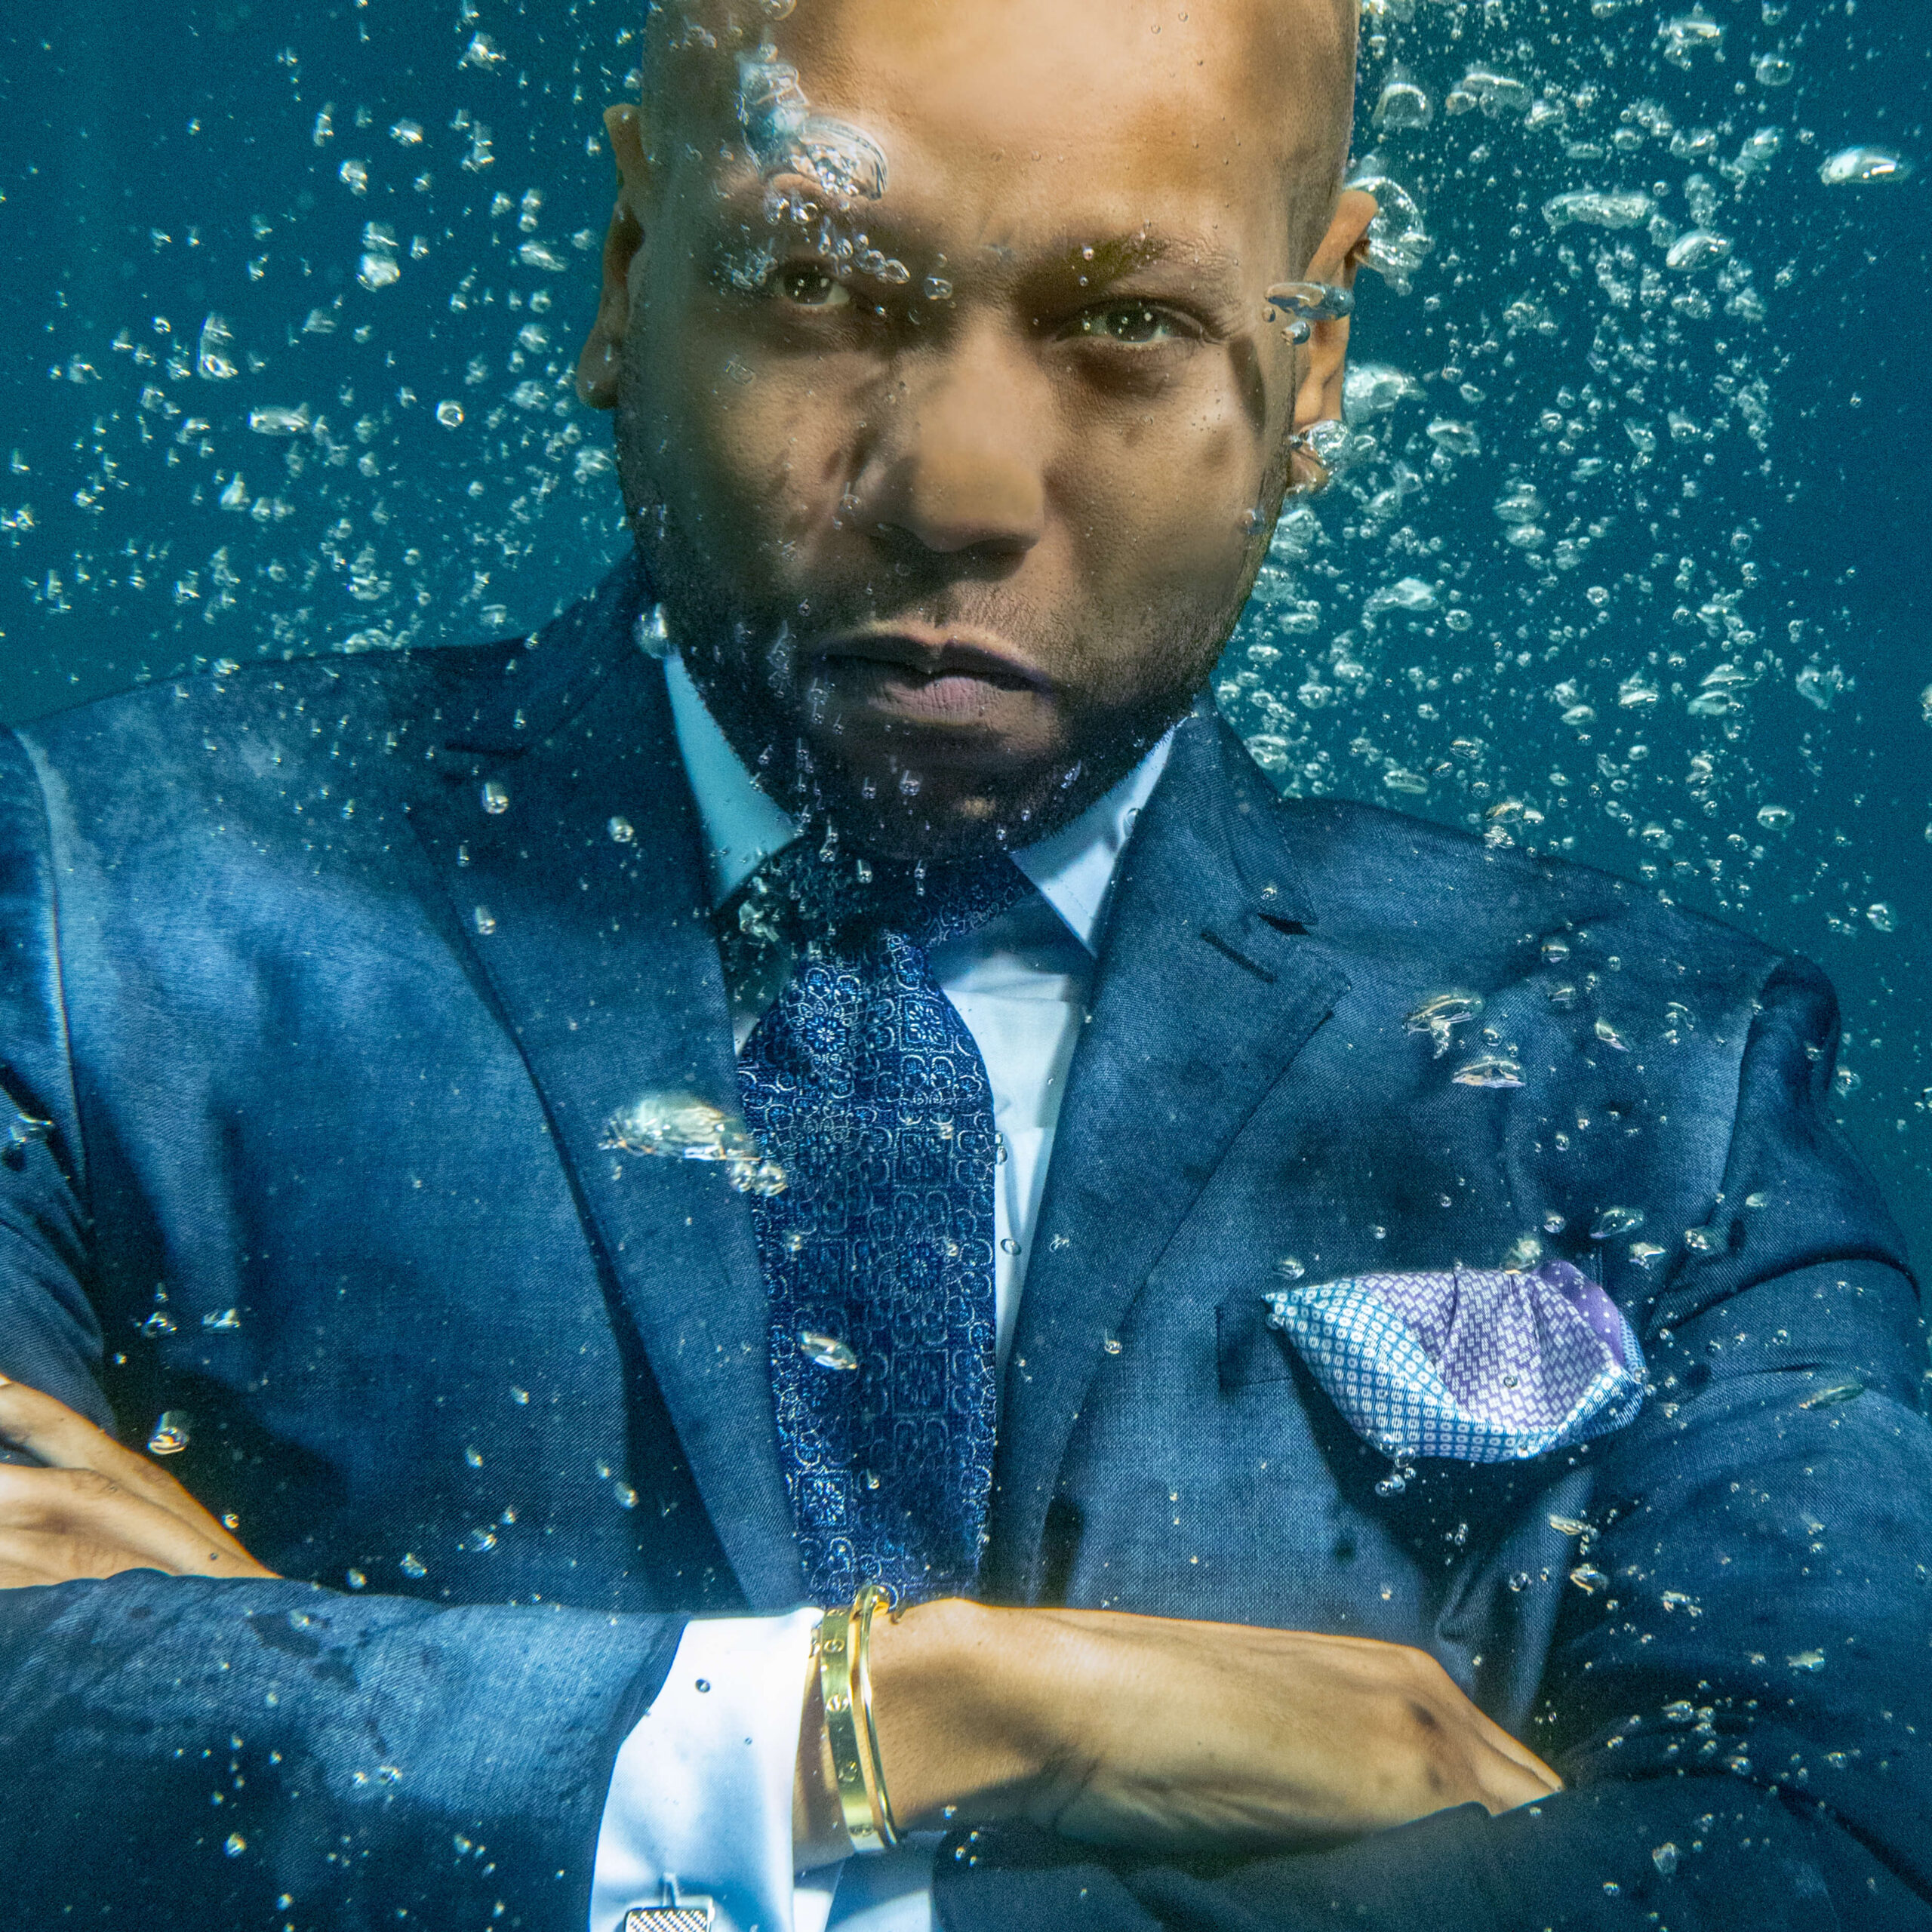 man crossing arms underwater in a luxury navy blue suit with a serious look on his face